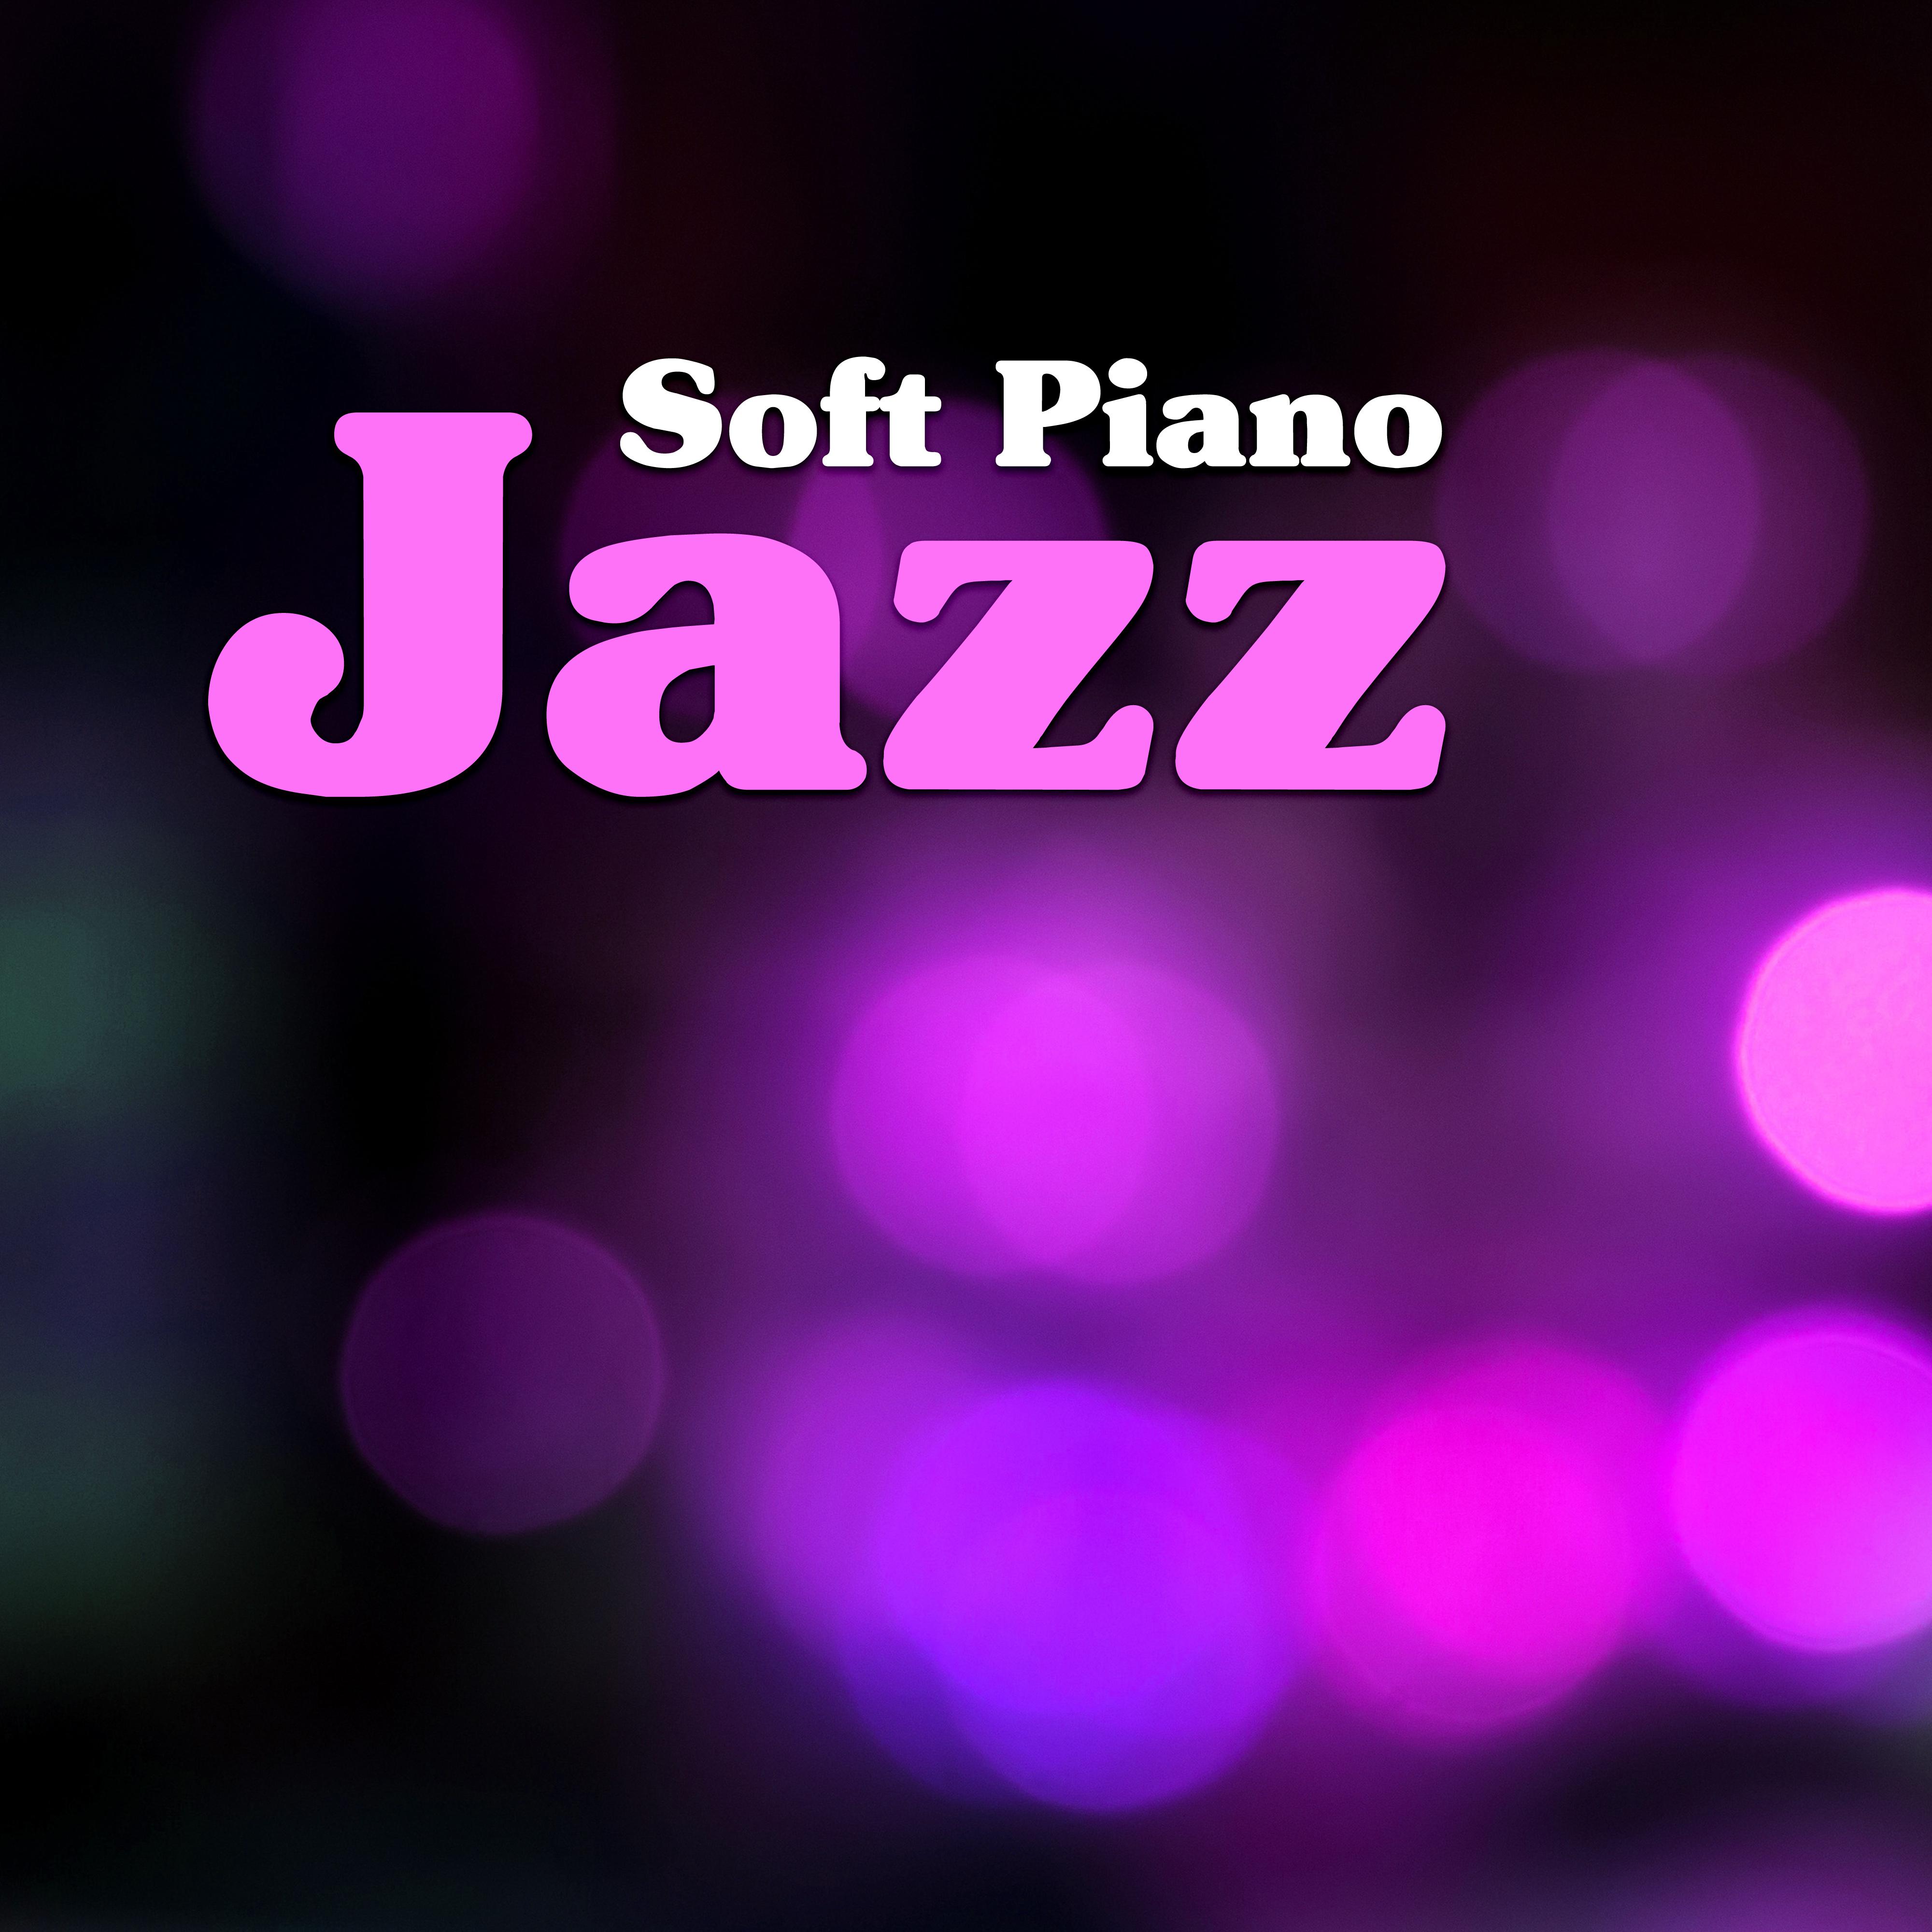 Soft Piano Jazz  Instrumental Jazz Music, Rest with Piano Melodies, Soothing Sounds to Relax